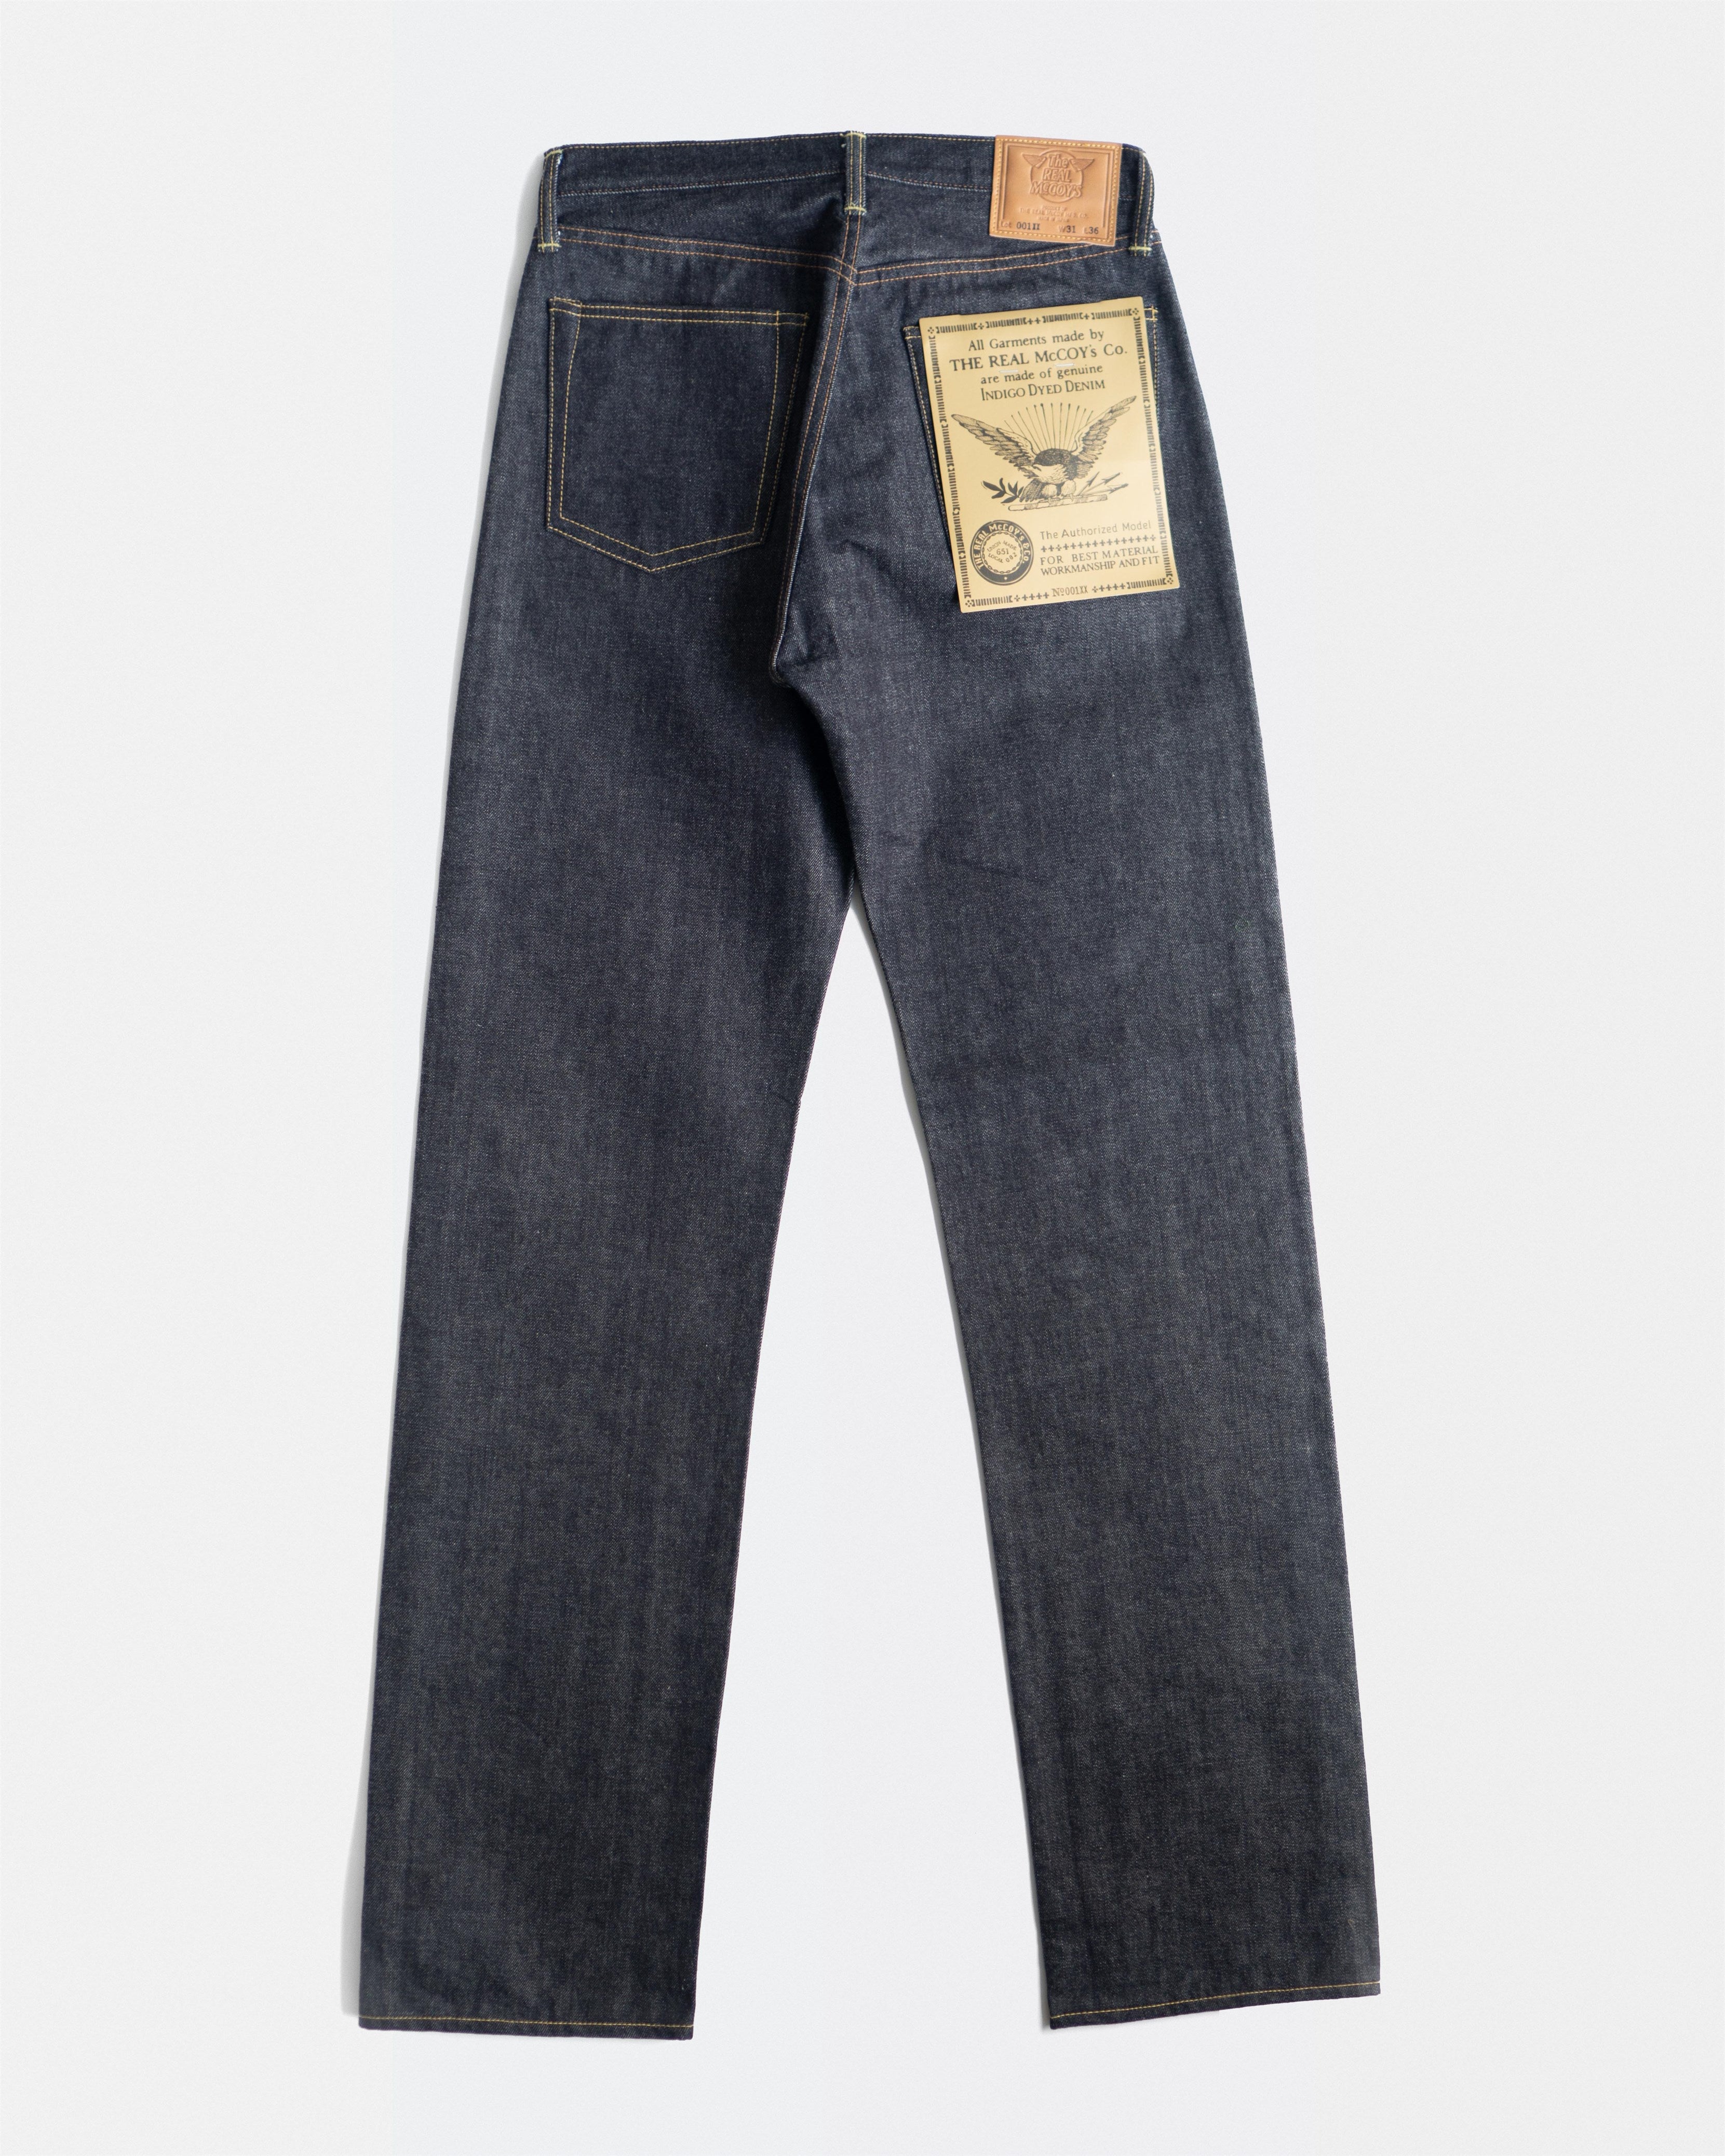 The Real McCoy's Lot 001XX Denim | MP17051 – The Signet Store